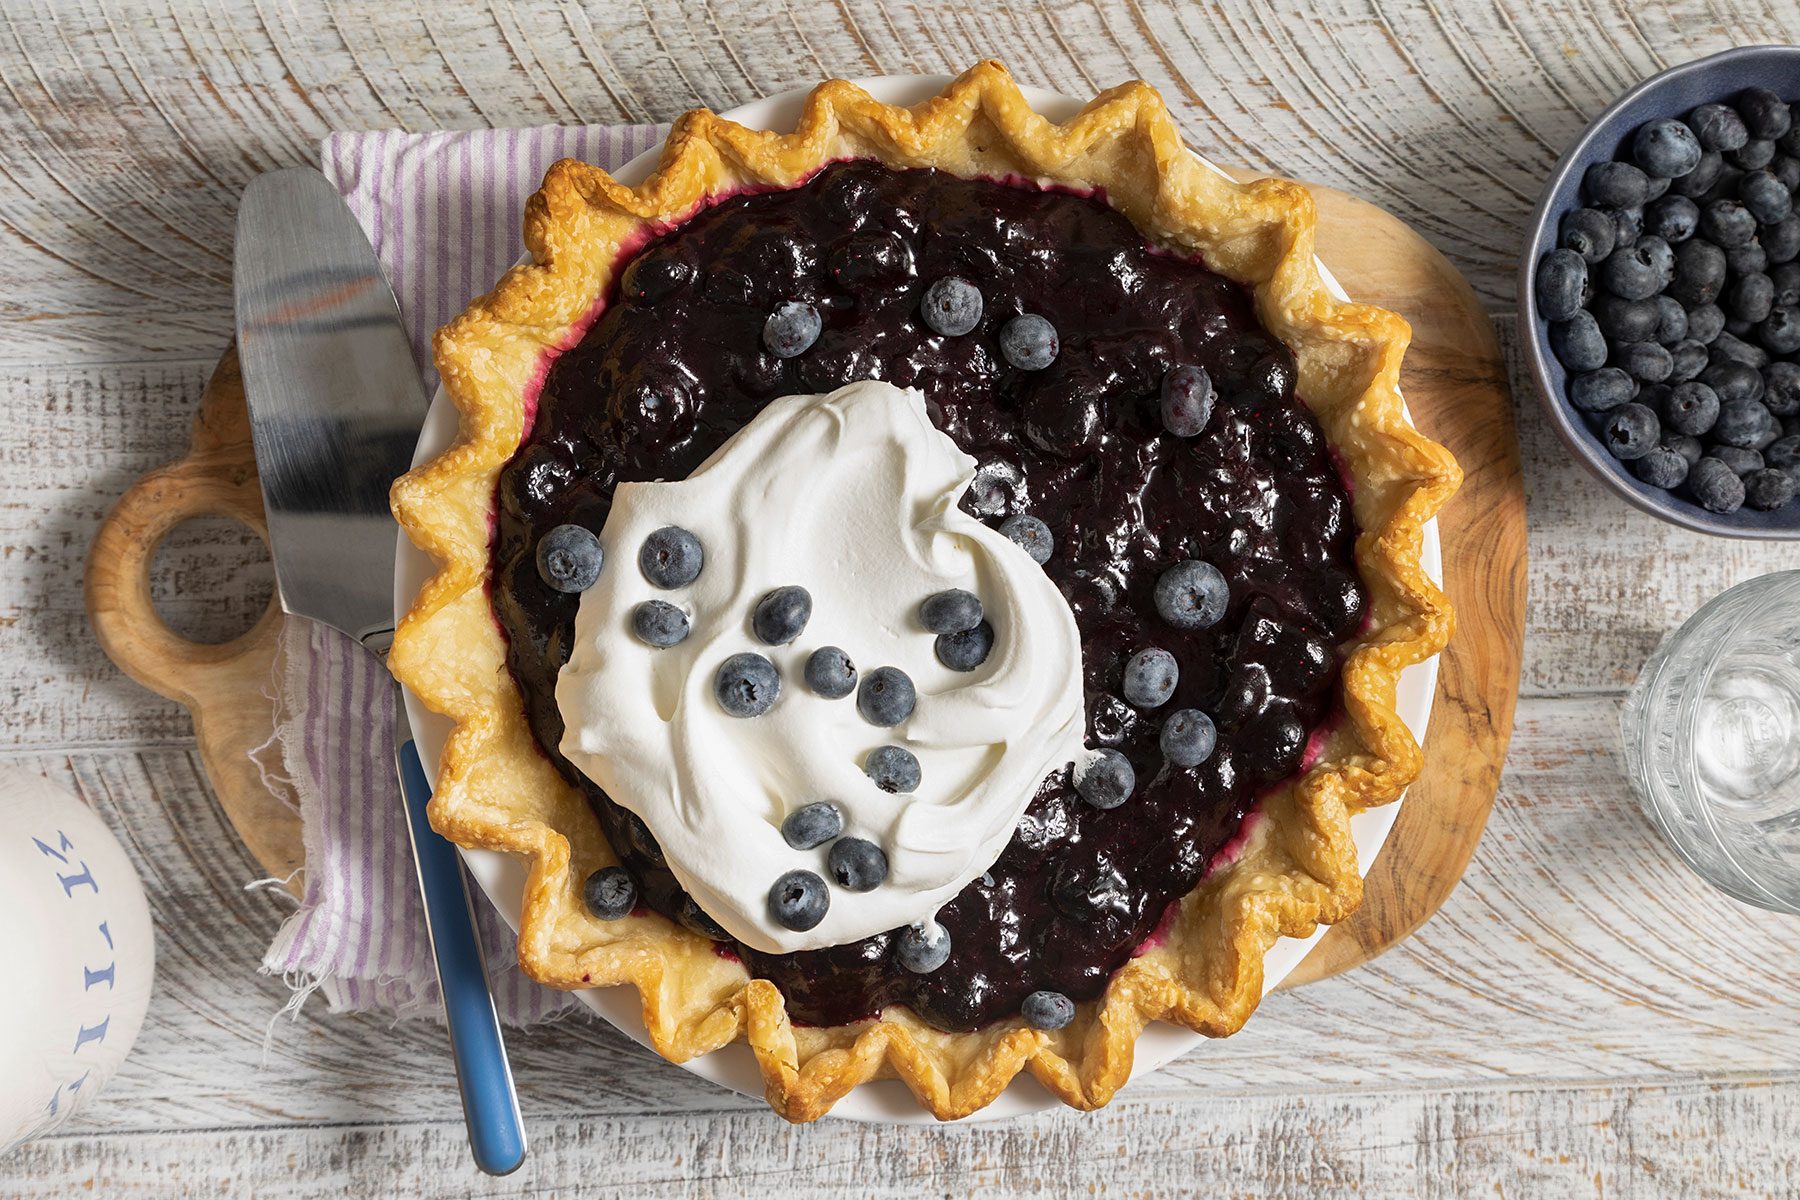 Blueberry Pie topped with whipped cream and blueberries